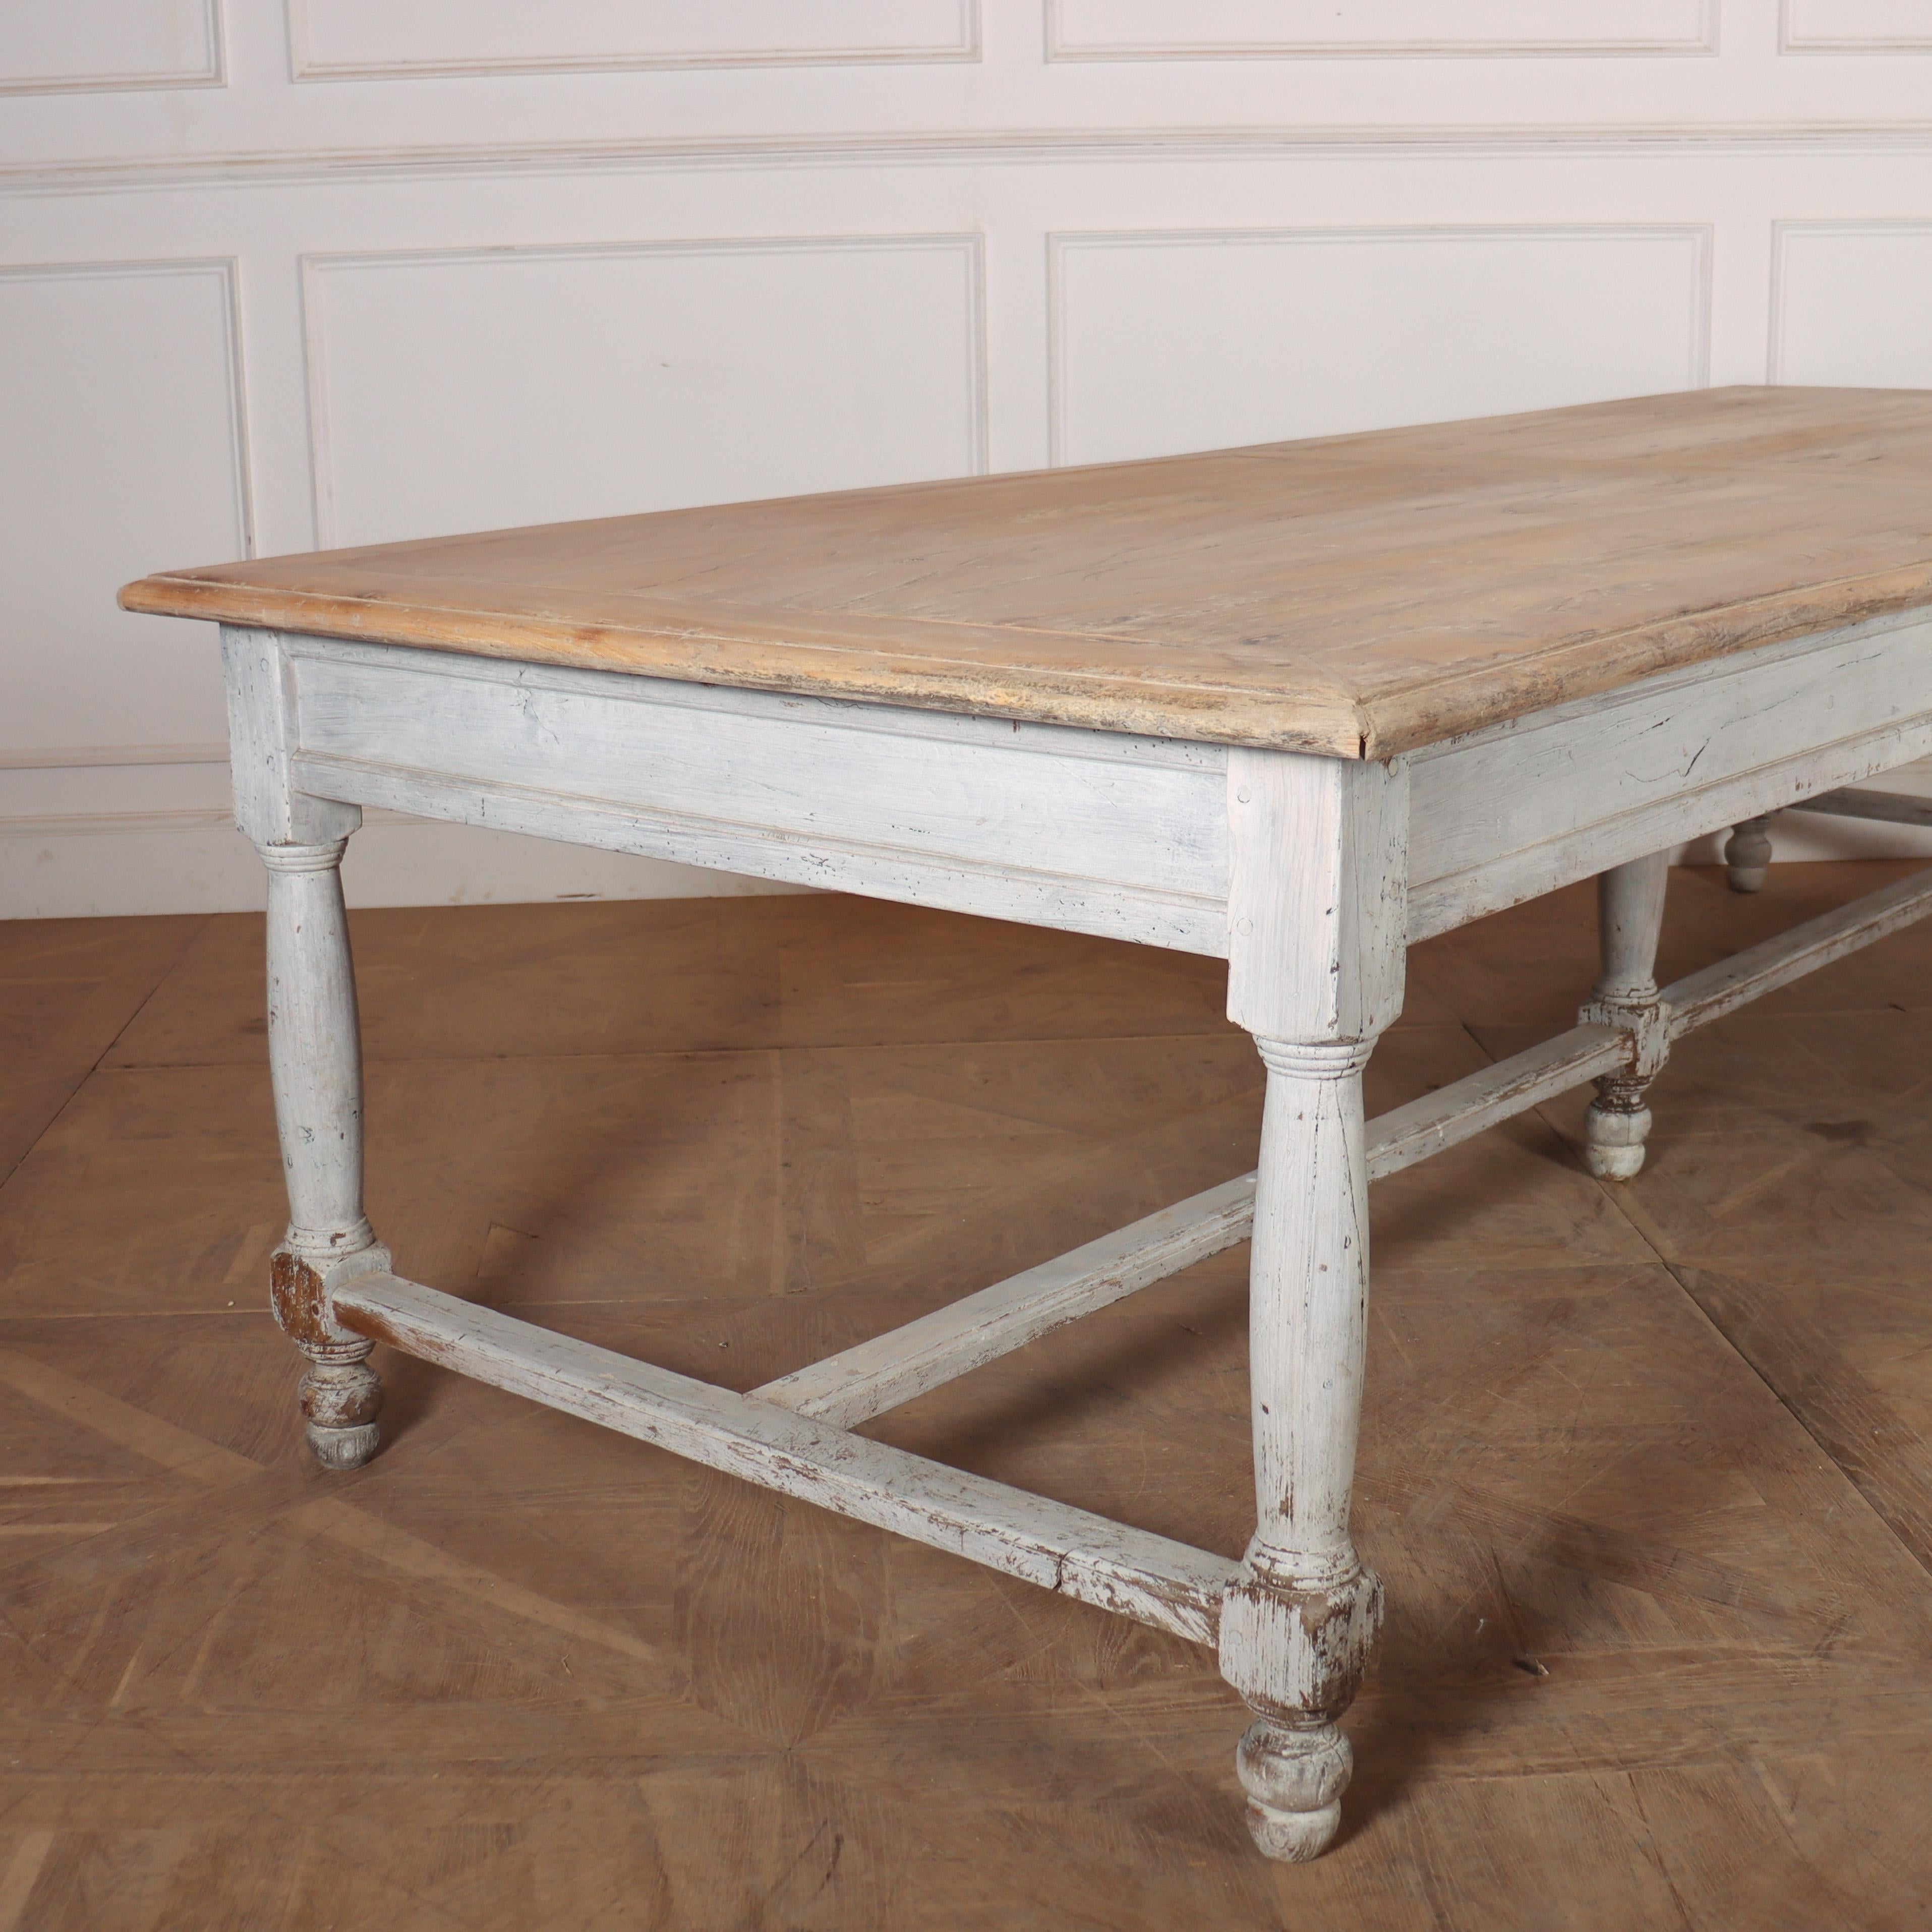 Wonderful early 19th C French farmhouse table with an original painted base and a scrubbed and bleached elm panelled top. 1810.

Clearance is 24.5